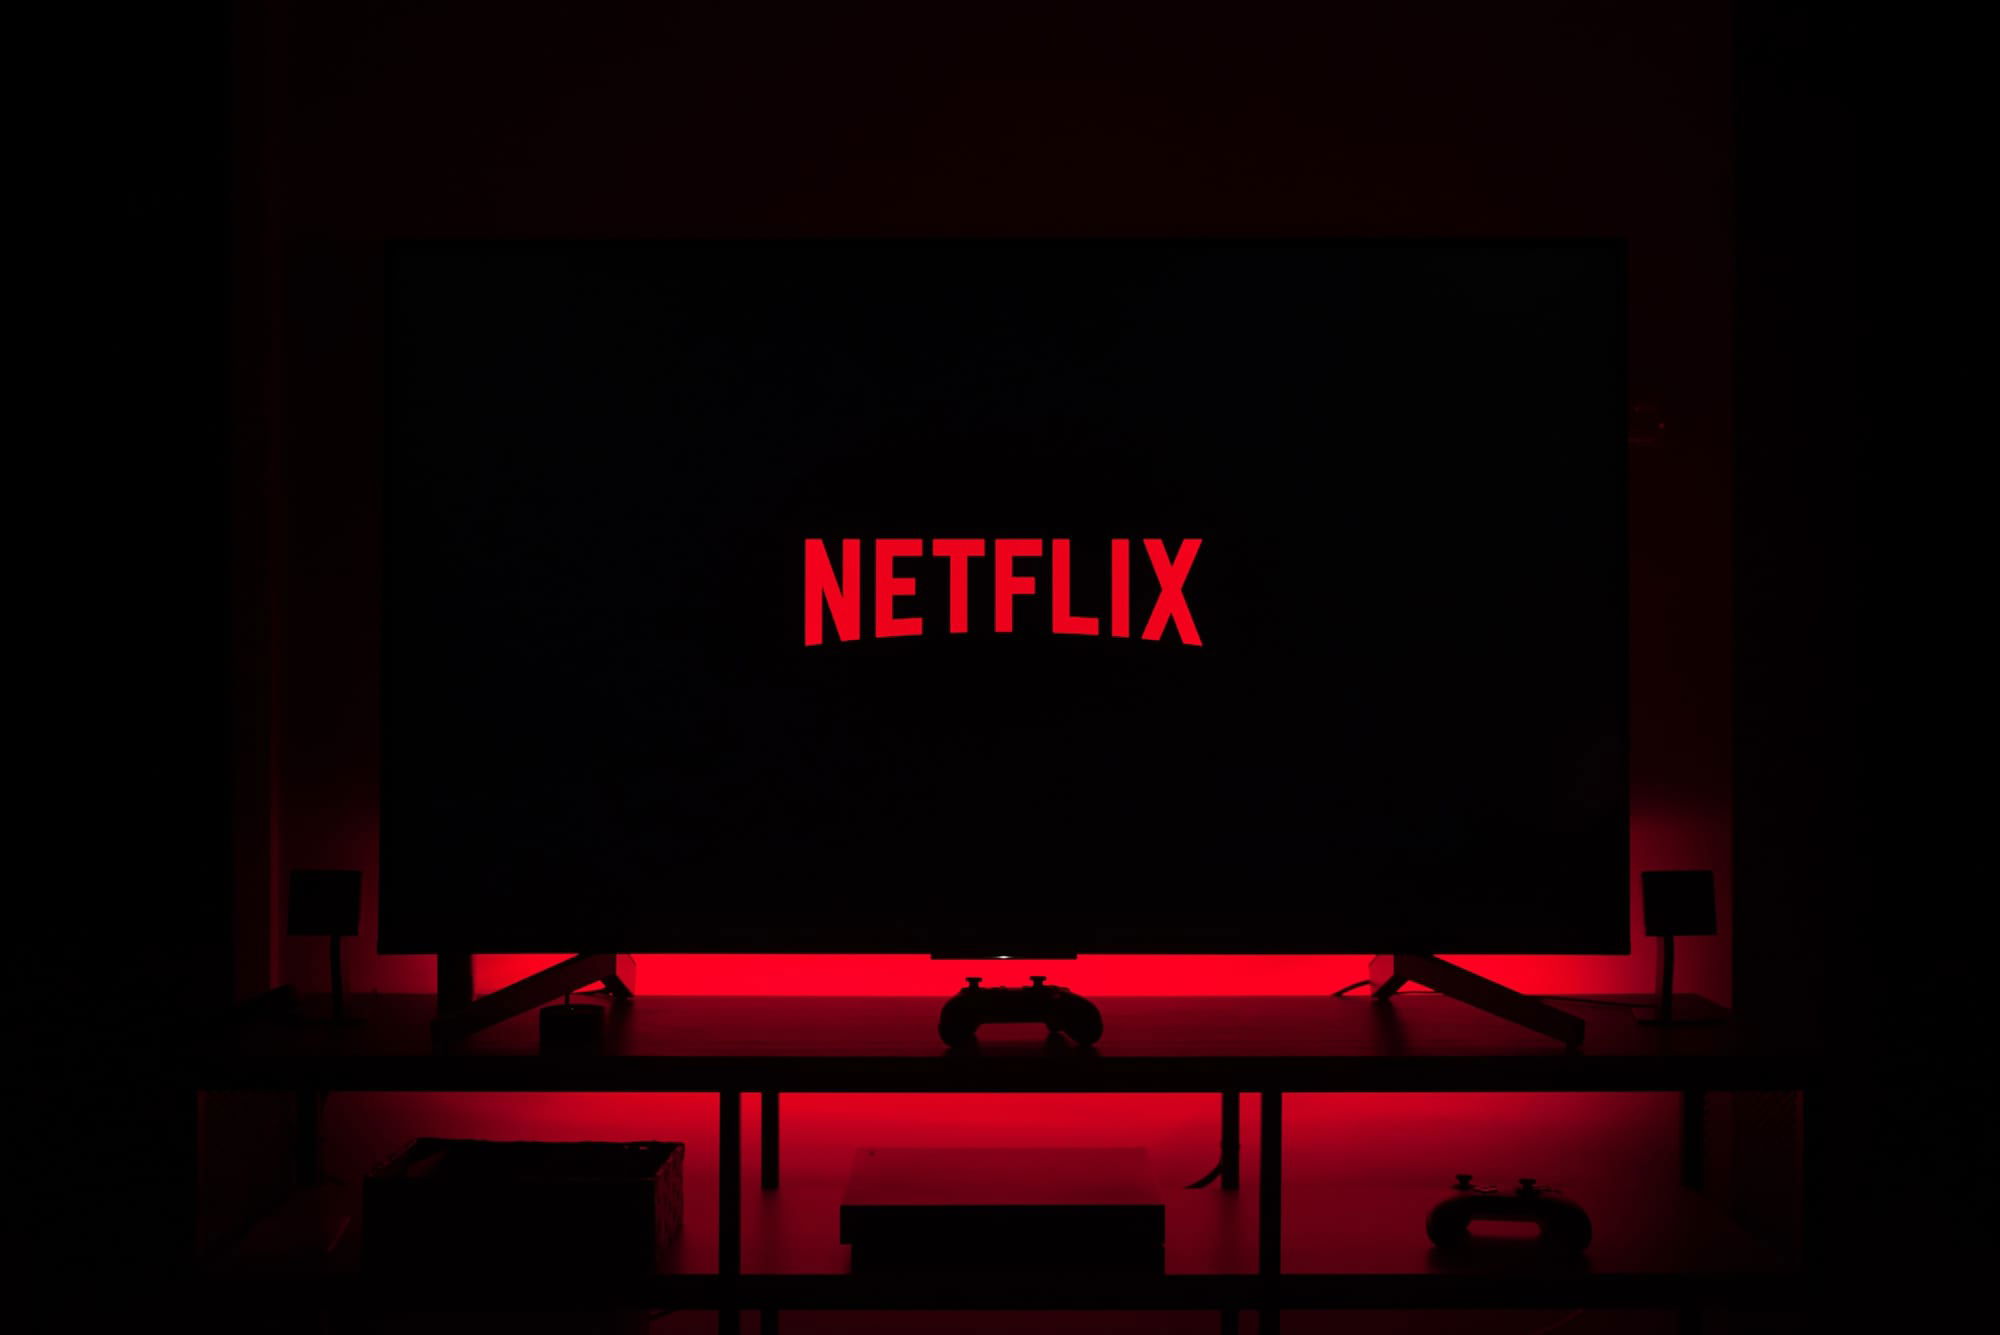 Netflix tells employees they can quit if they don't want to work on content they disagree with, according to new company culture guidelines